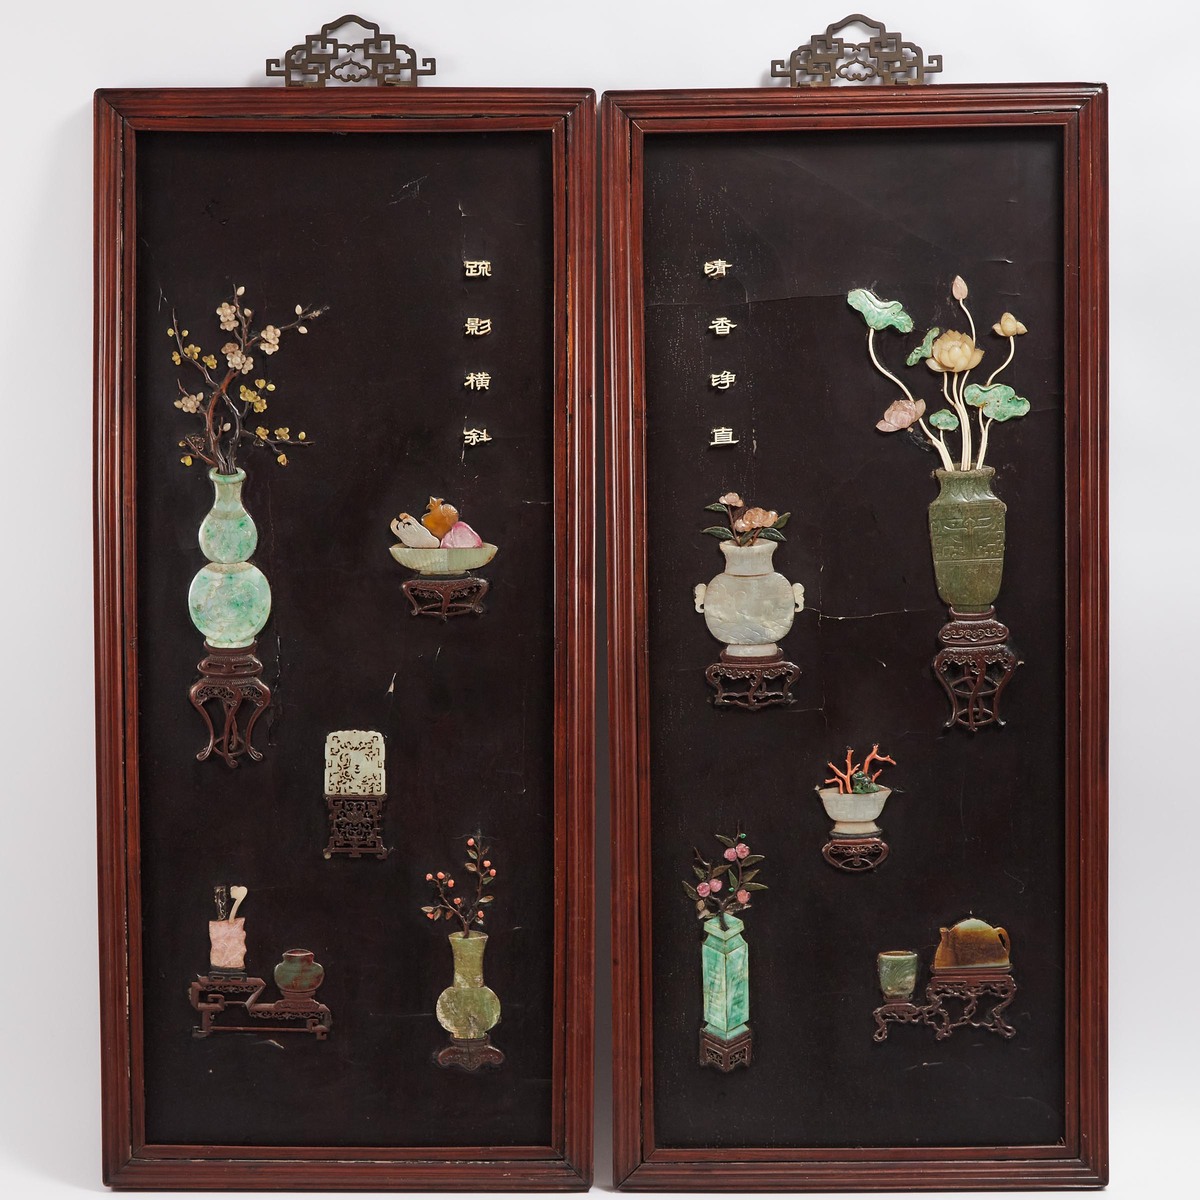 A Pair of Jade-Inlaid 'Hundred Antiques' Panels, Late Qing Dynasty, 19th Century, 清 十九世纪 黑漆嵌宝大挂屏一对,